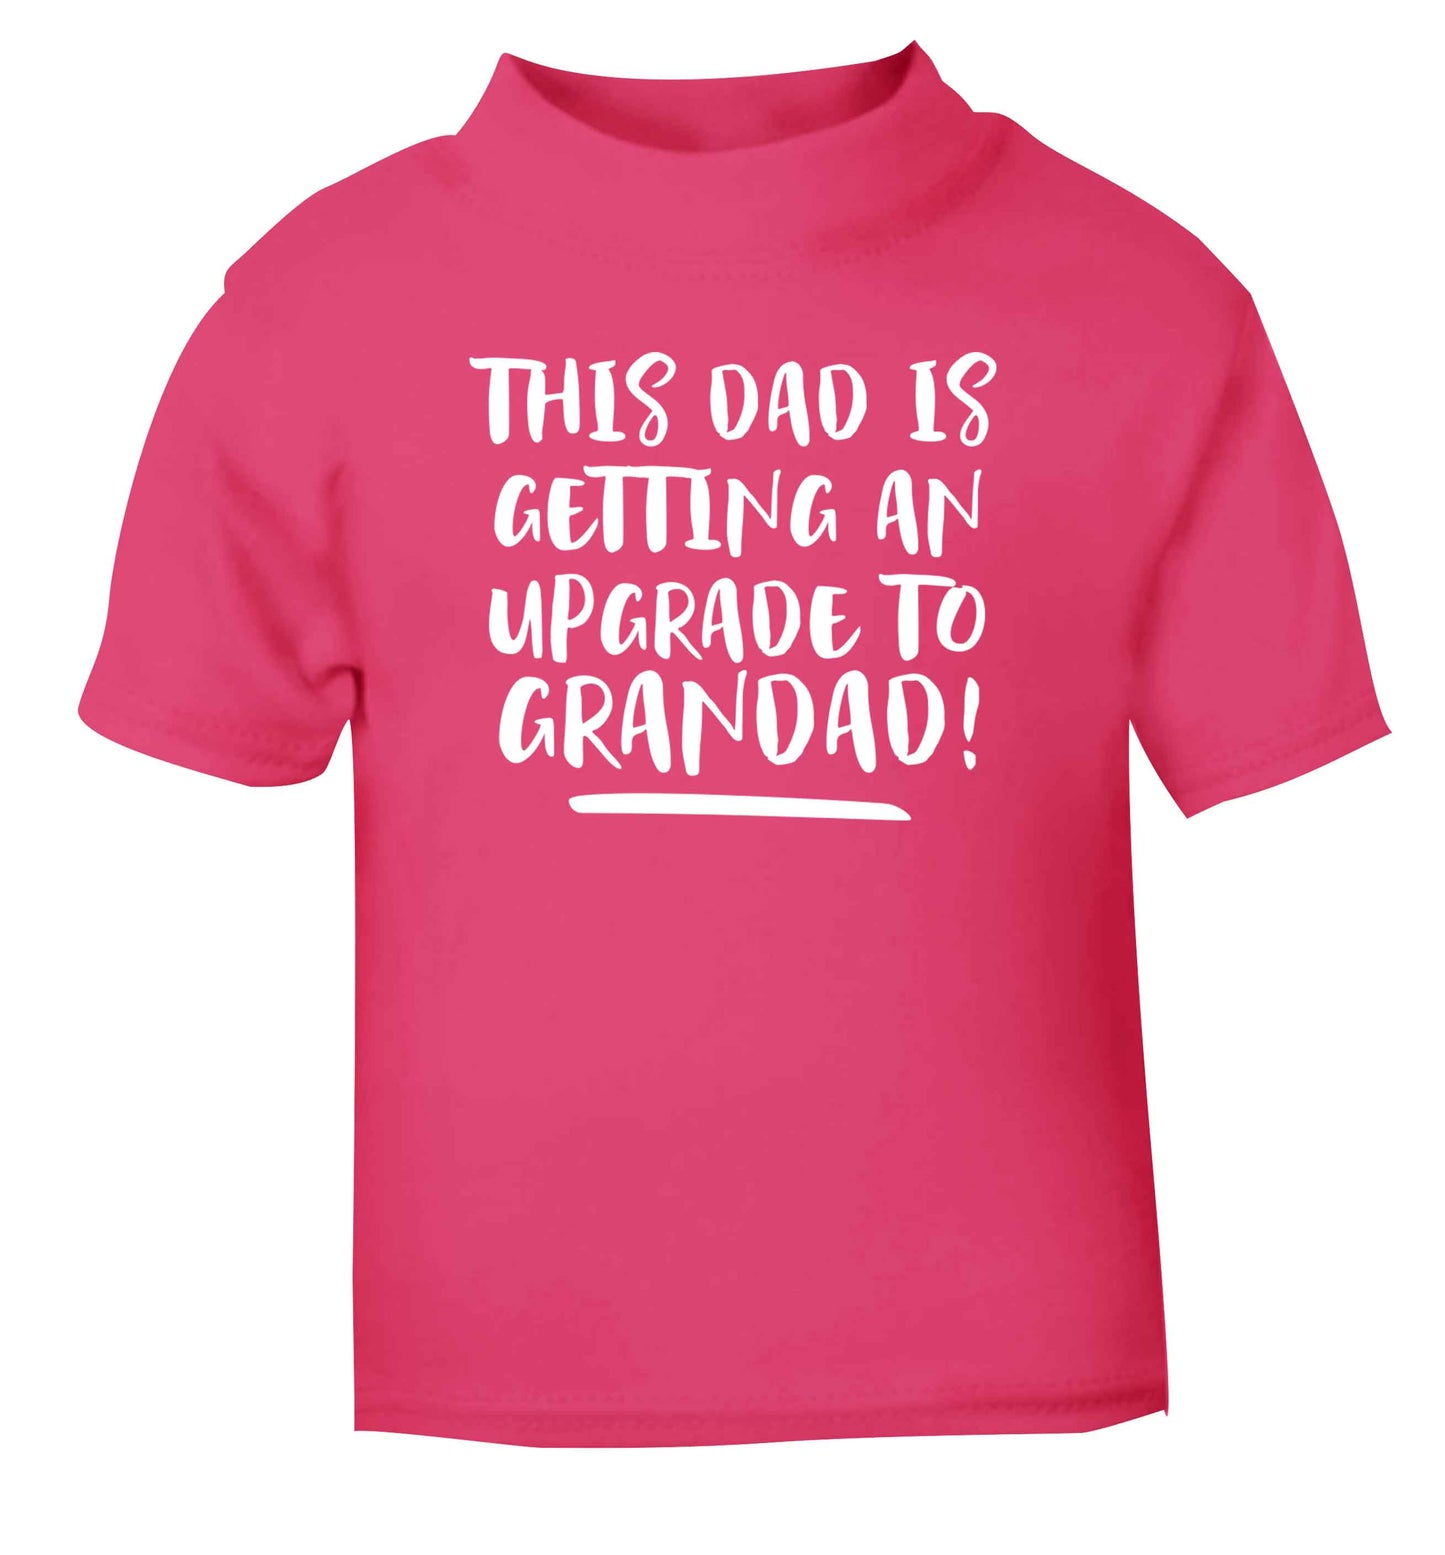 This dad is getting an upgrade to grandad! pink Baby Toddler Tshirt 2 Years